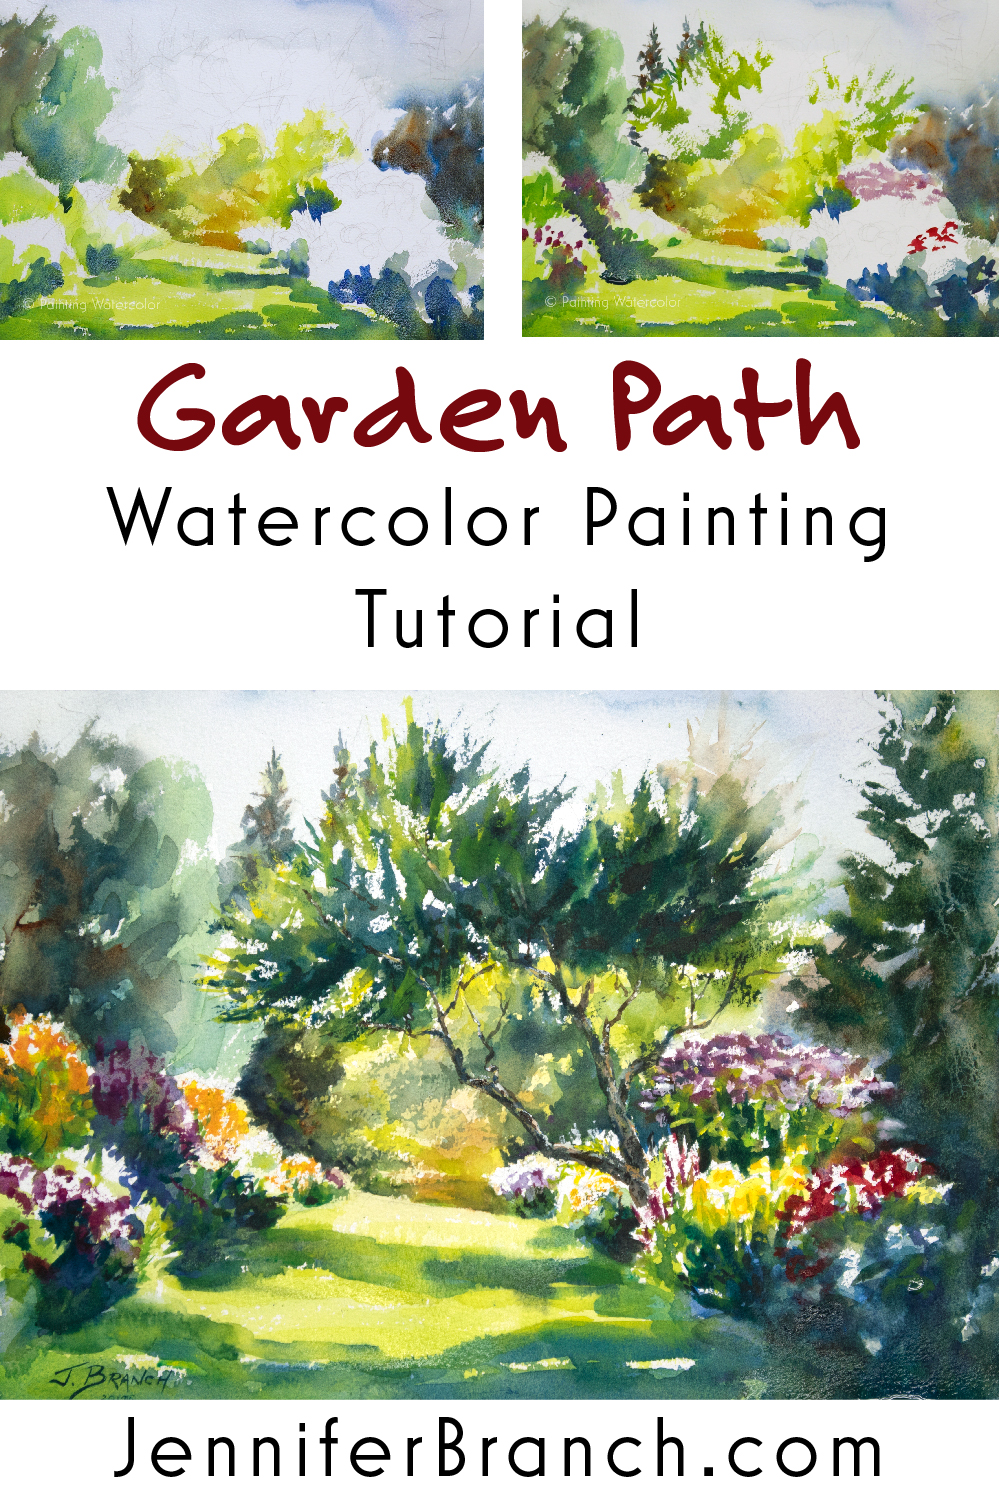 Garden Path Painting Tutorial watercolor painting tutorial by Jennifer Branch